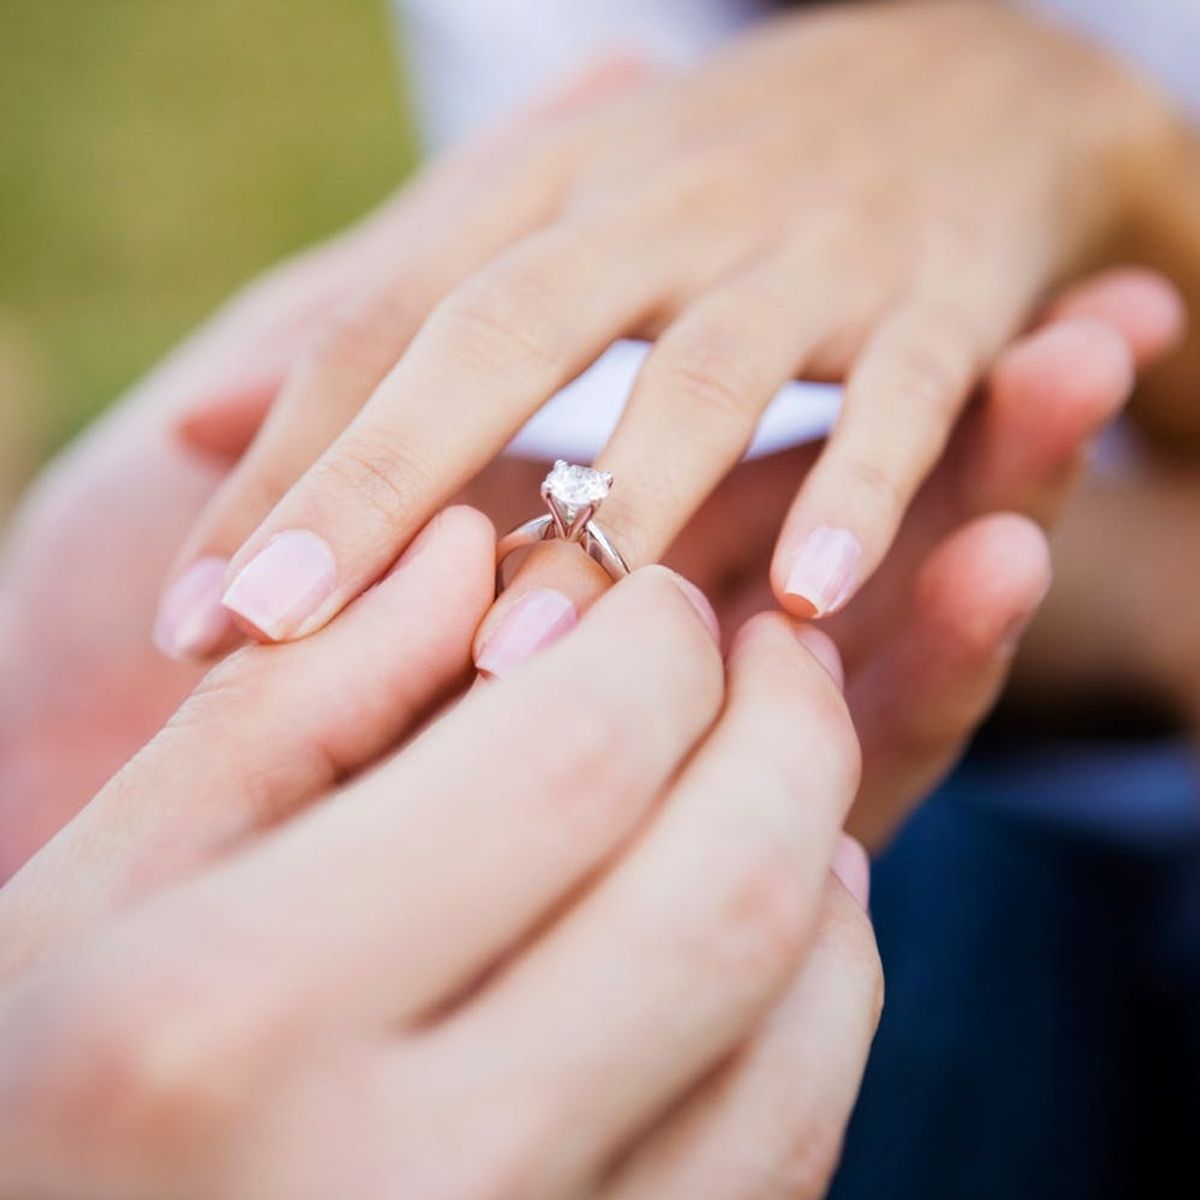 Here’s How Much Americans Really Spend on an Engagement Ring